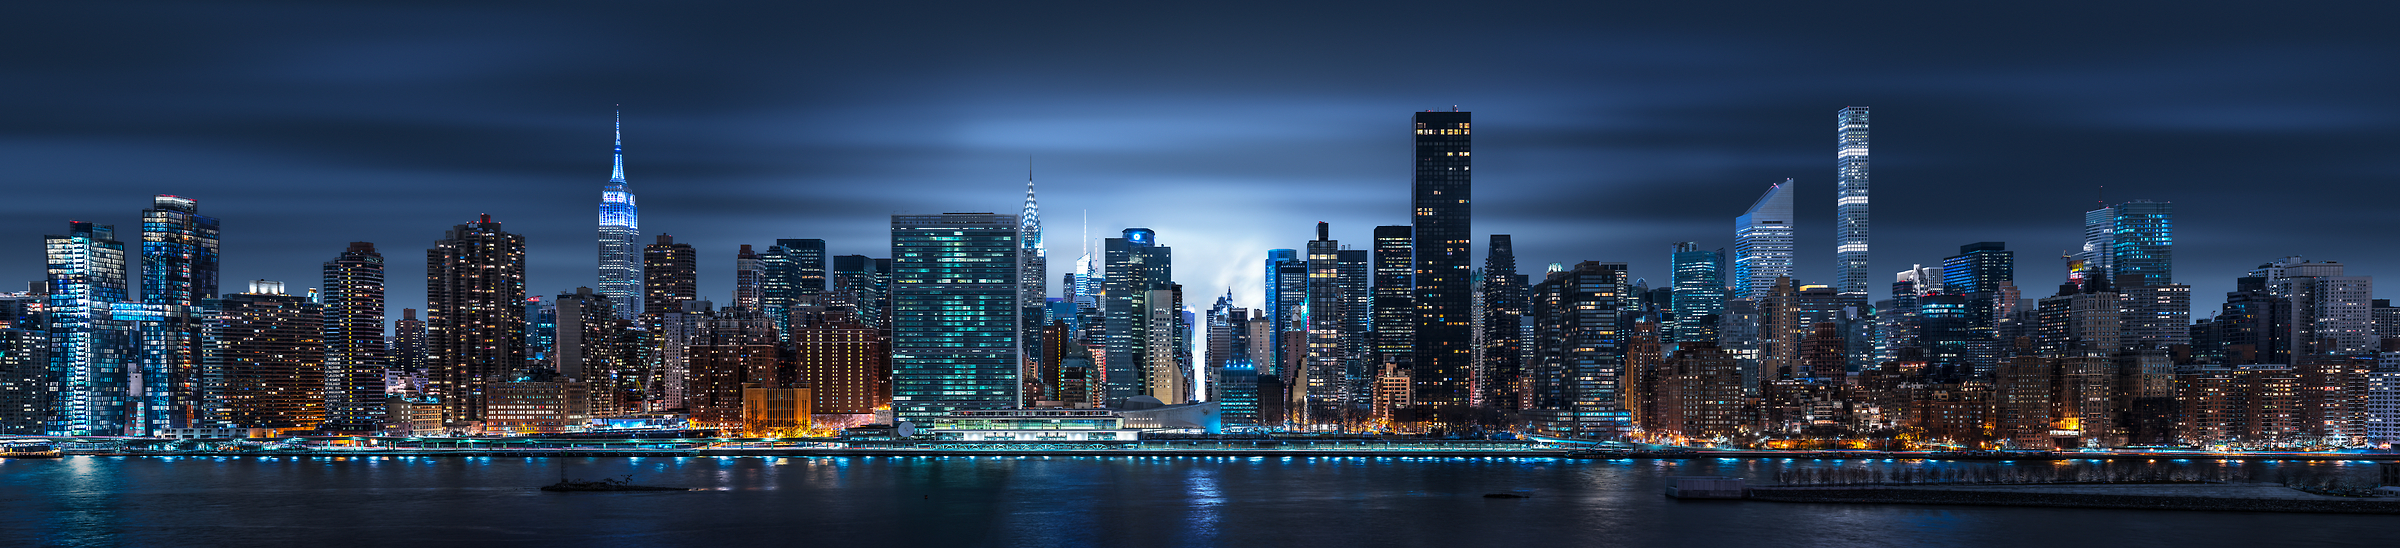 6,410 megapixels! A very high resolution, large-format VAST photo print of the NYC skyline at night with the East River; cityscape photo created by Dan Piech.